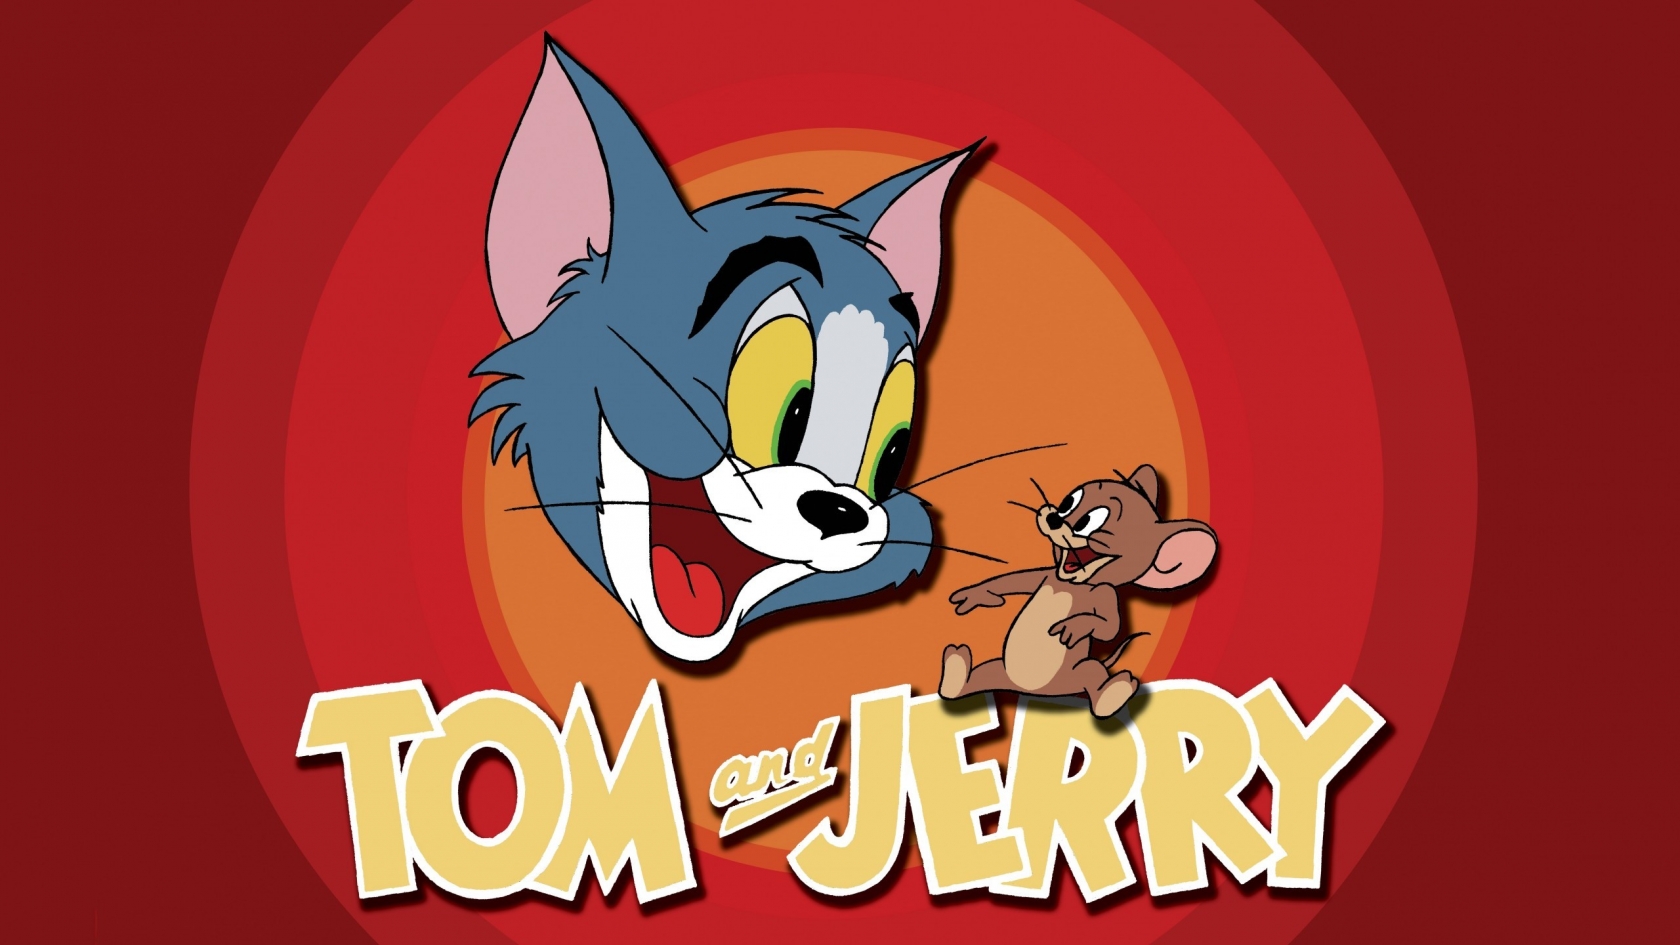 Tom and Jerry for 1680 x 945 HDTV resolution